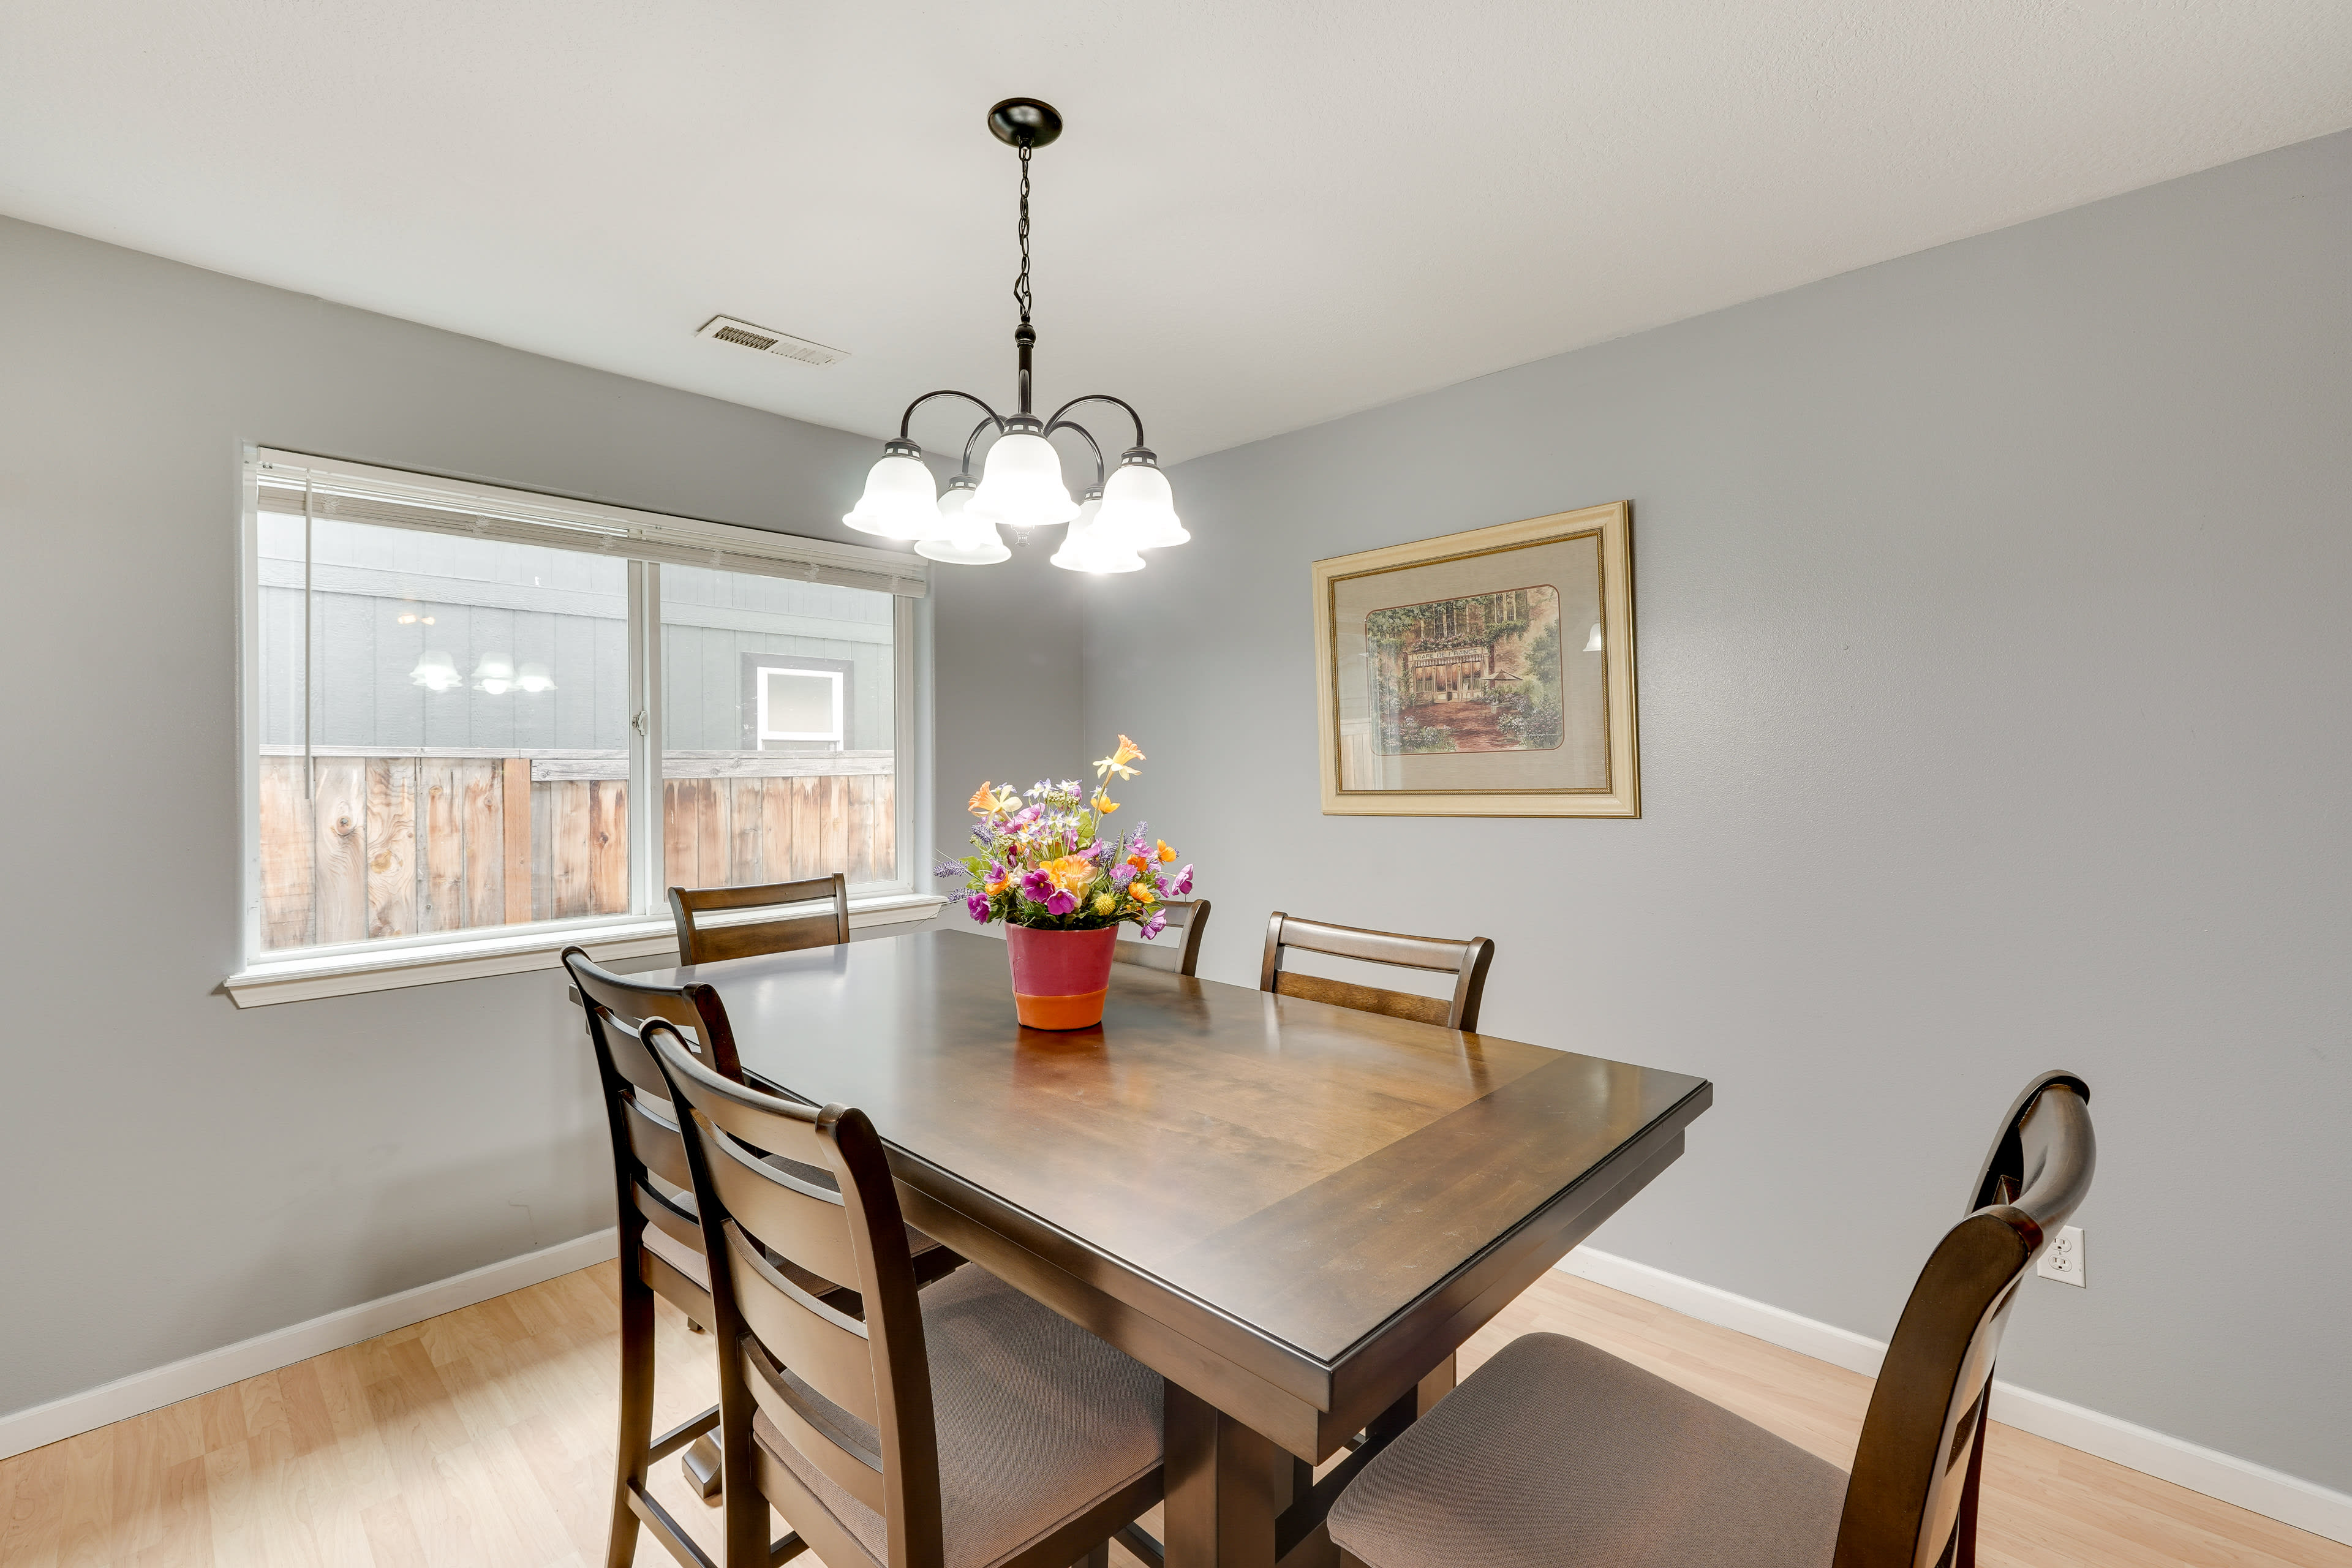 Dining Room | Dishware & Flatware Provided | Central A/C & Heating